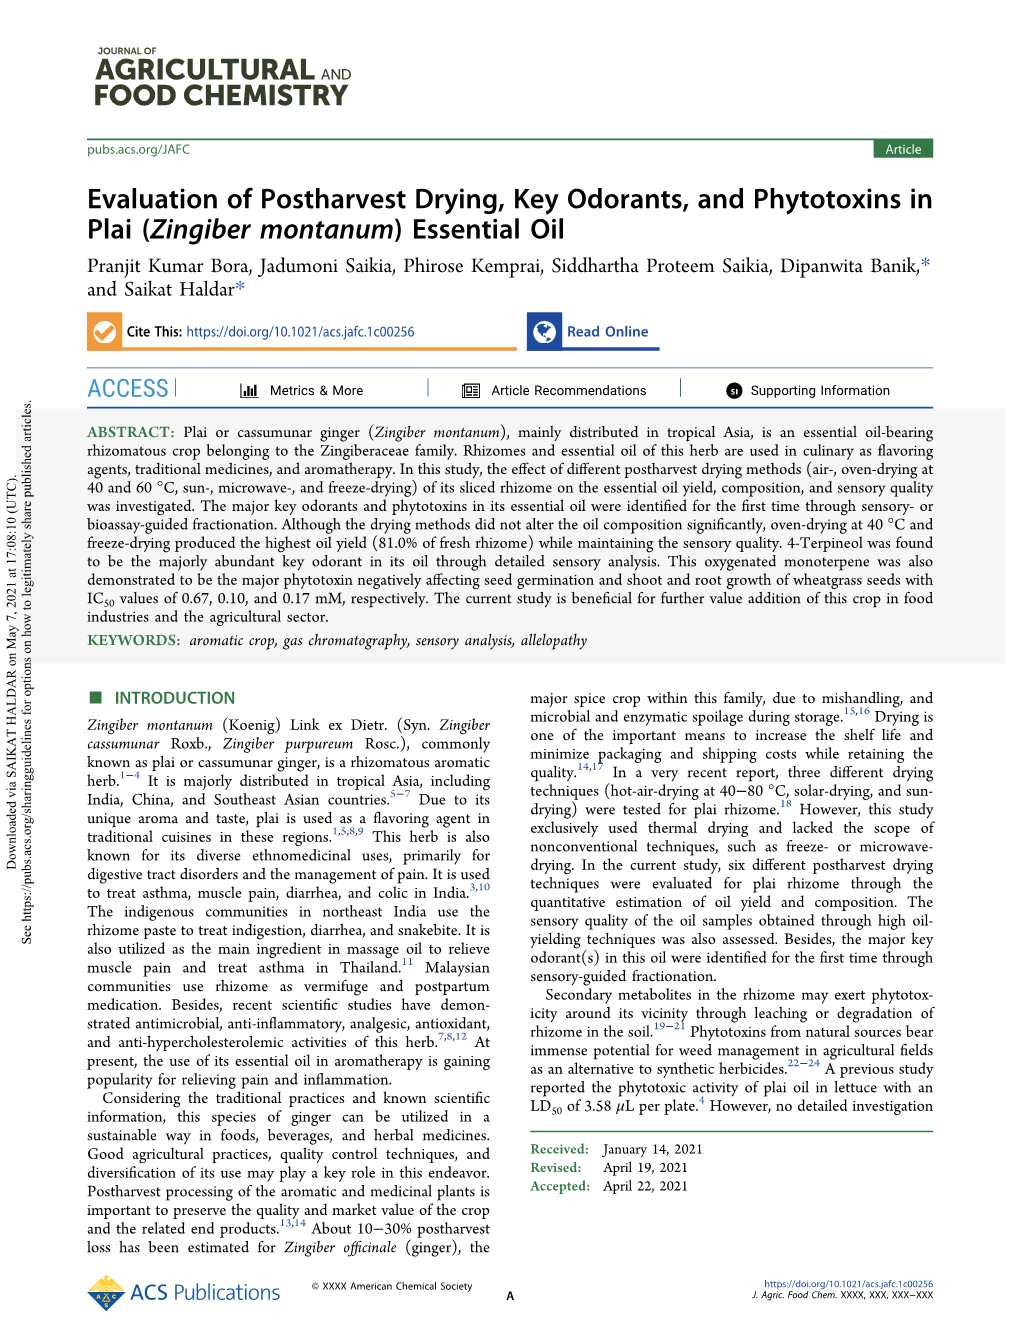 Evaluation of Postharvest Drying, Key Odorants, and Phytotoxins in Plai